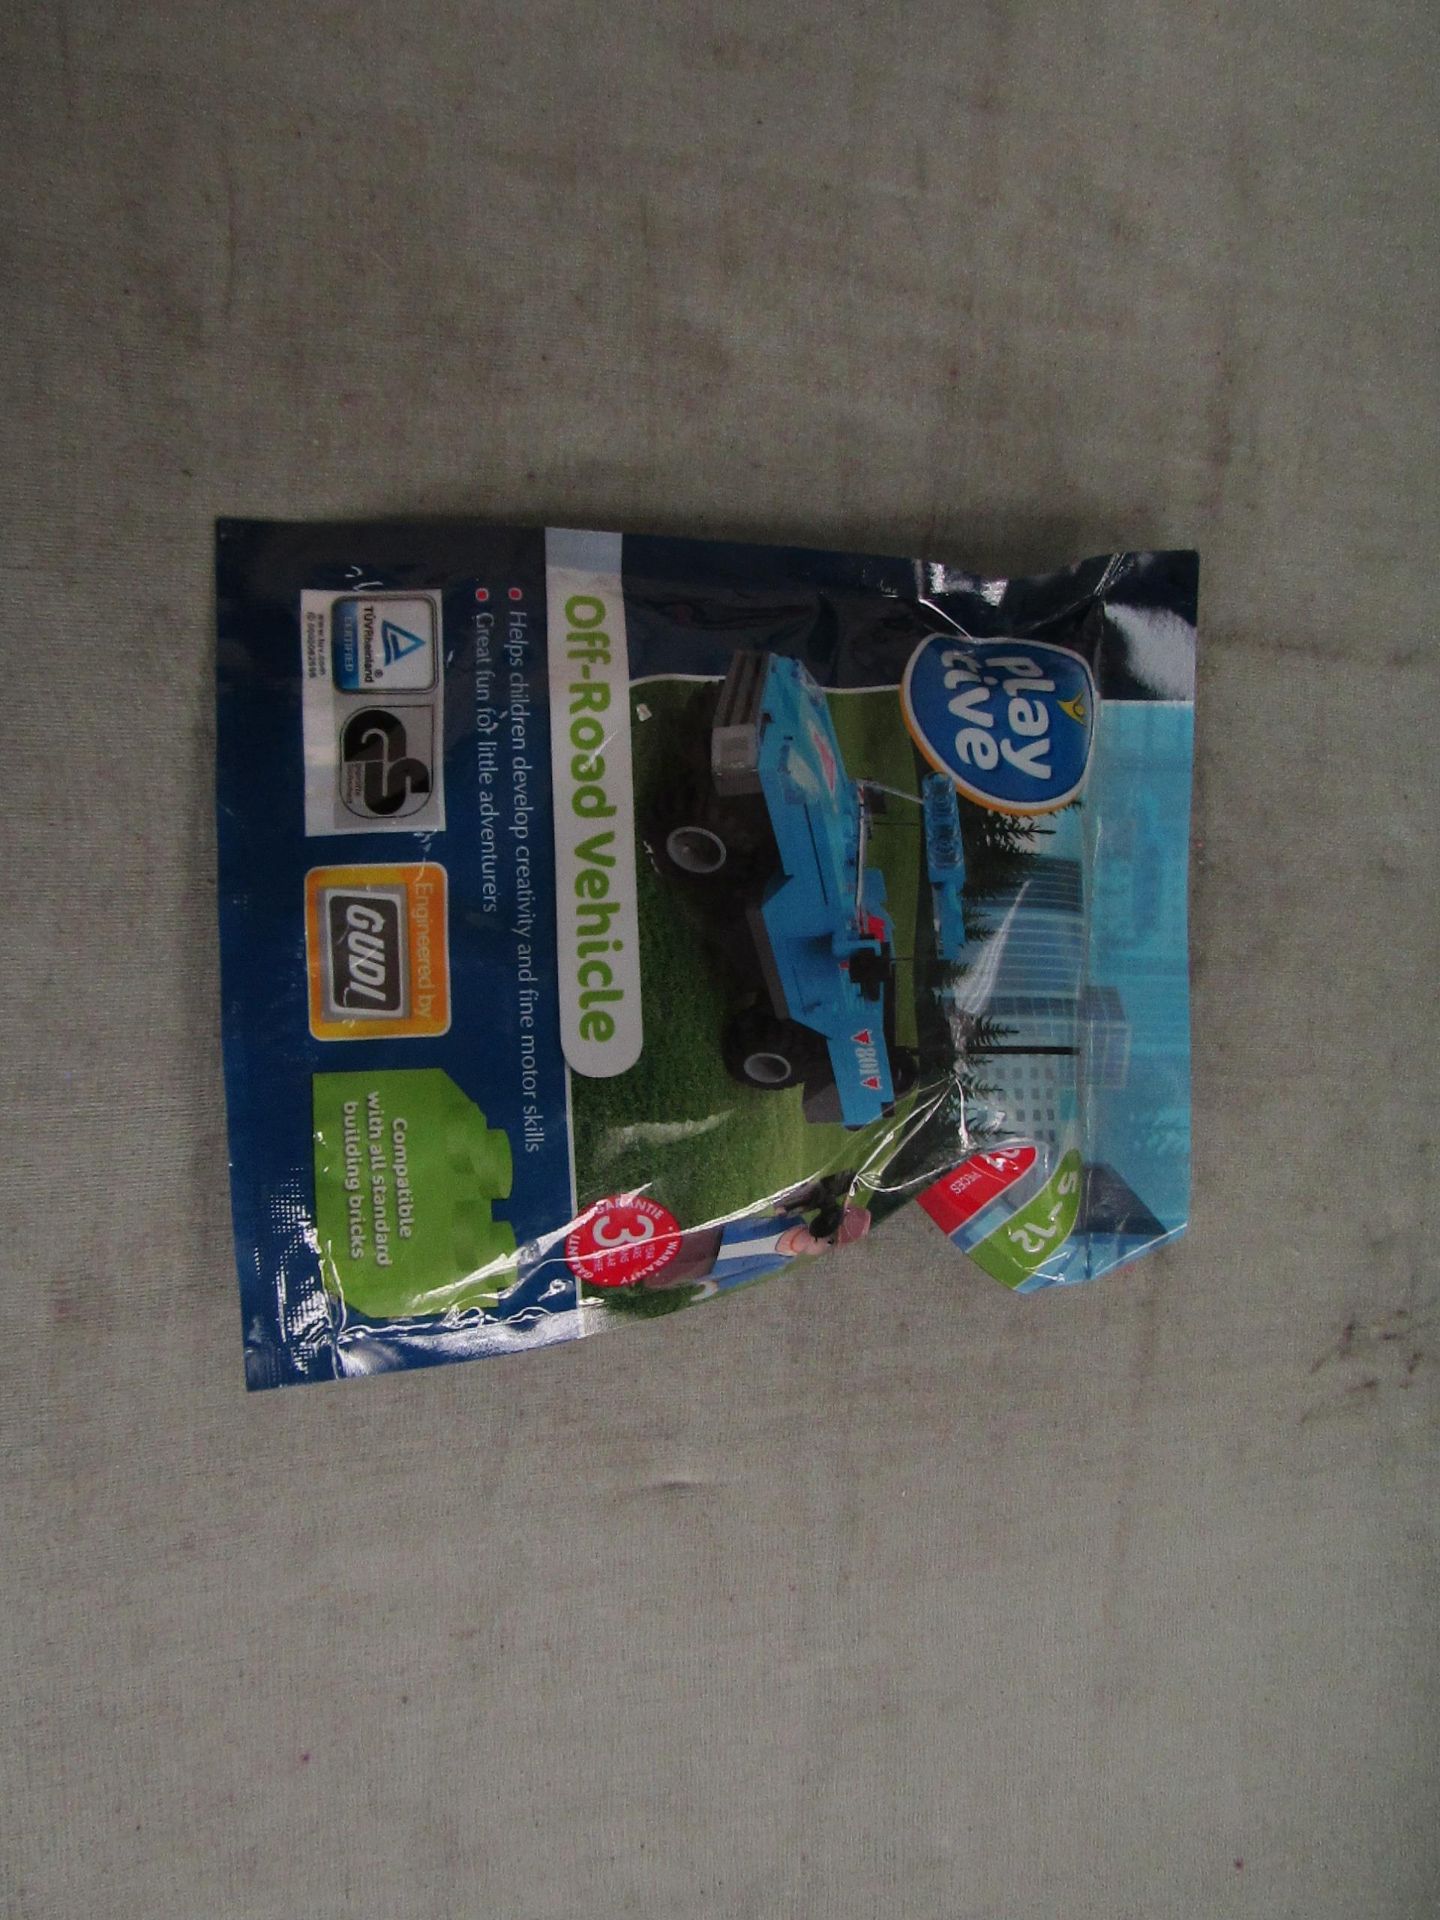 4x Play Tive - Build Your Own Blue Off-Road Vehicle - Unused & Packaged.